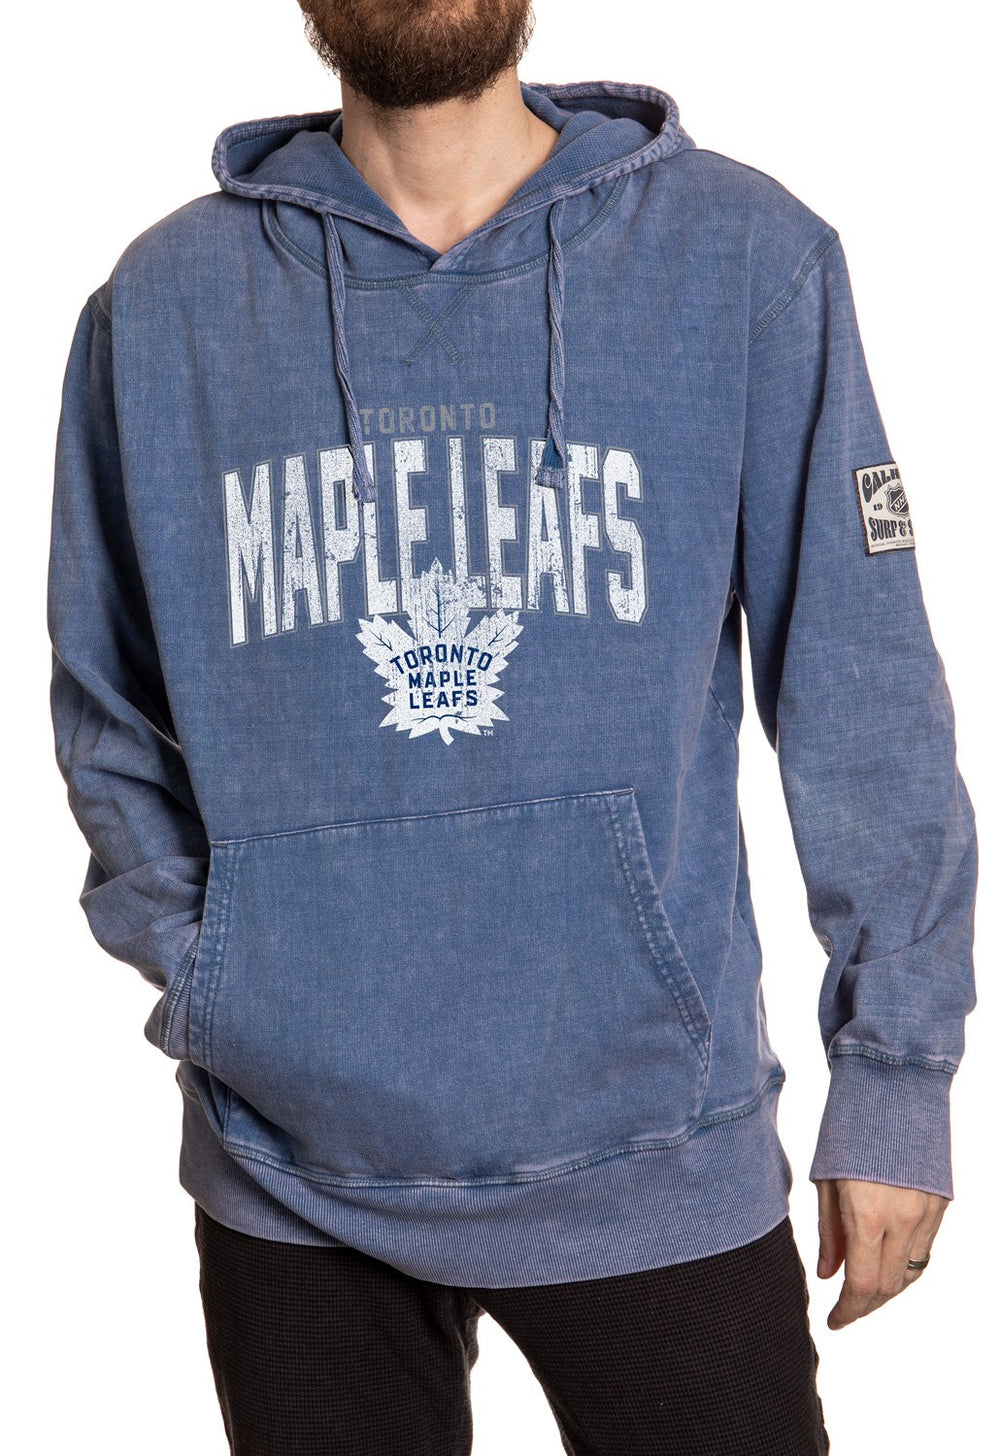 Mens Toronto Maple Leafs Sweater, Maple Leafs Cardigans, Sweaters